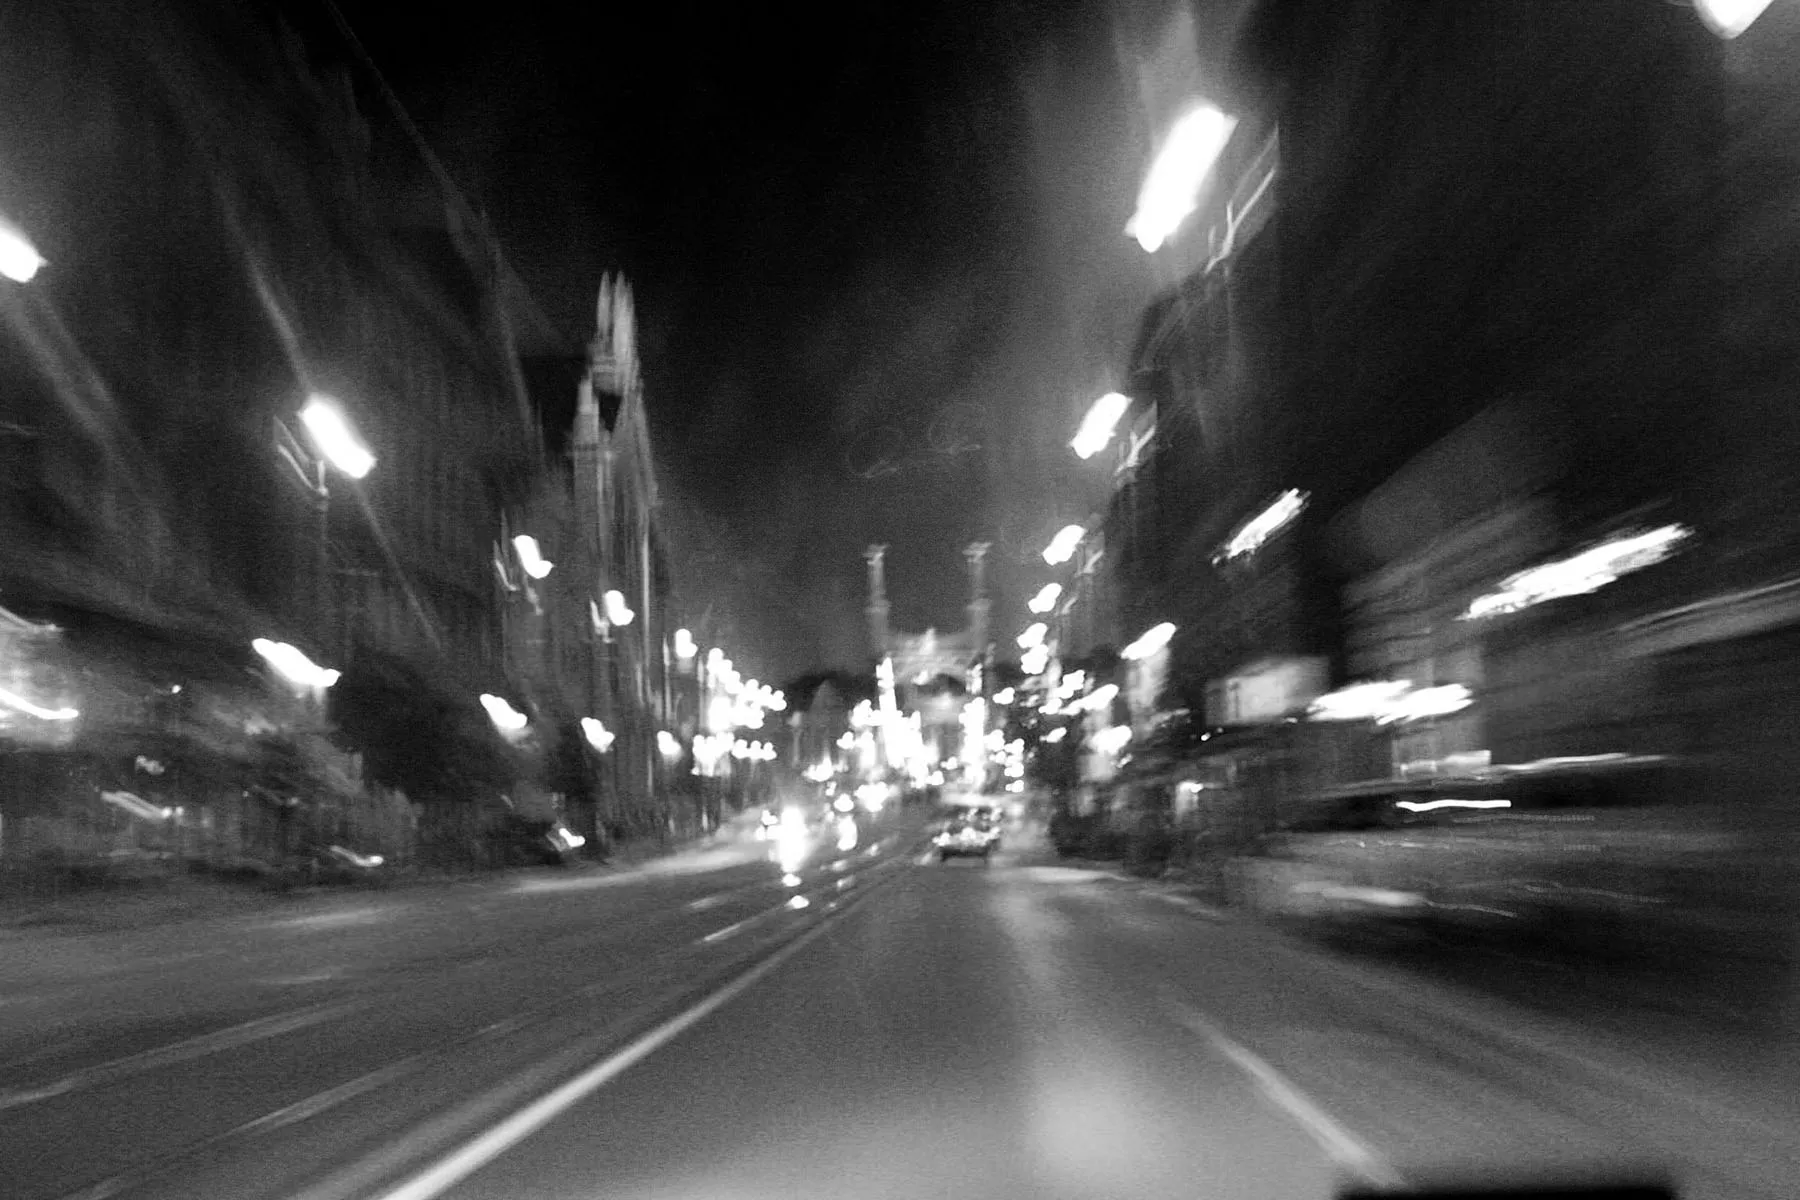 Speeding down the streets of Budapest.